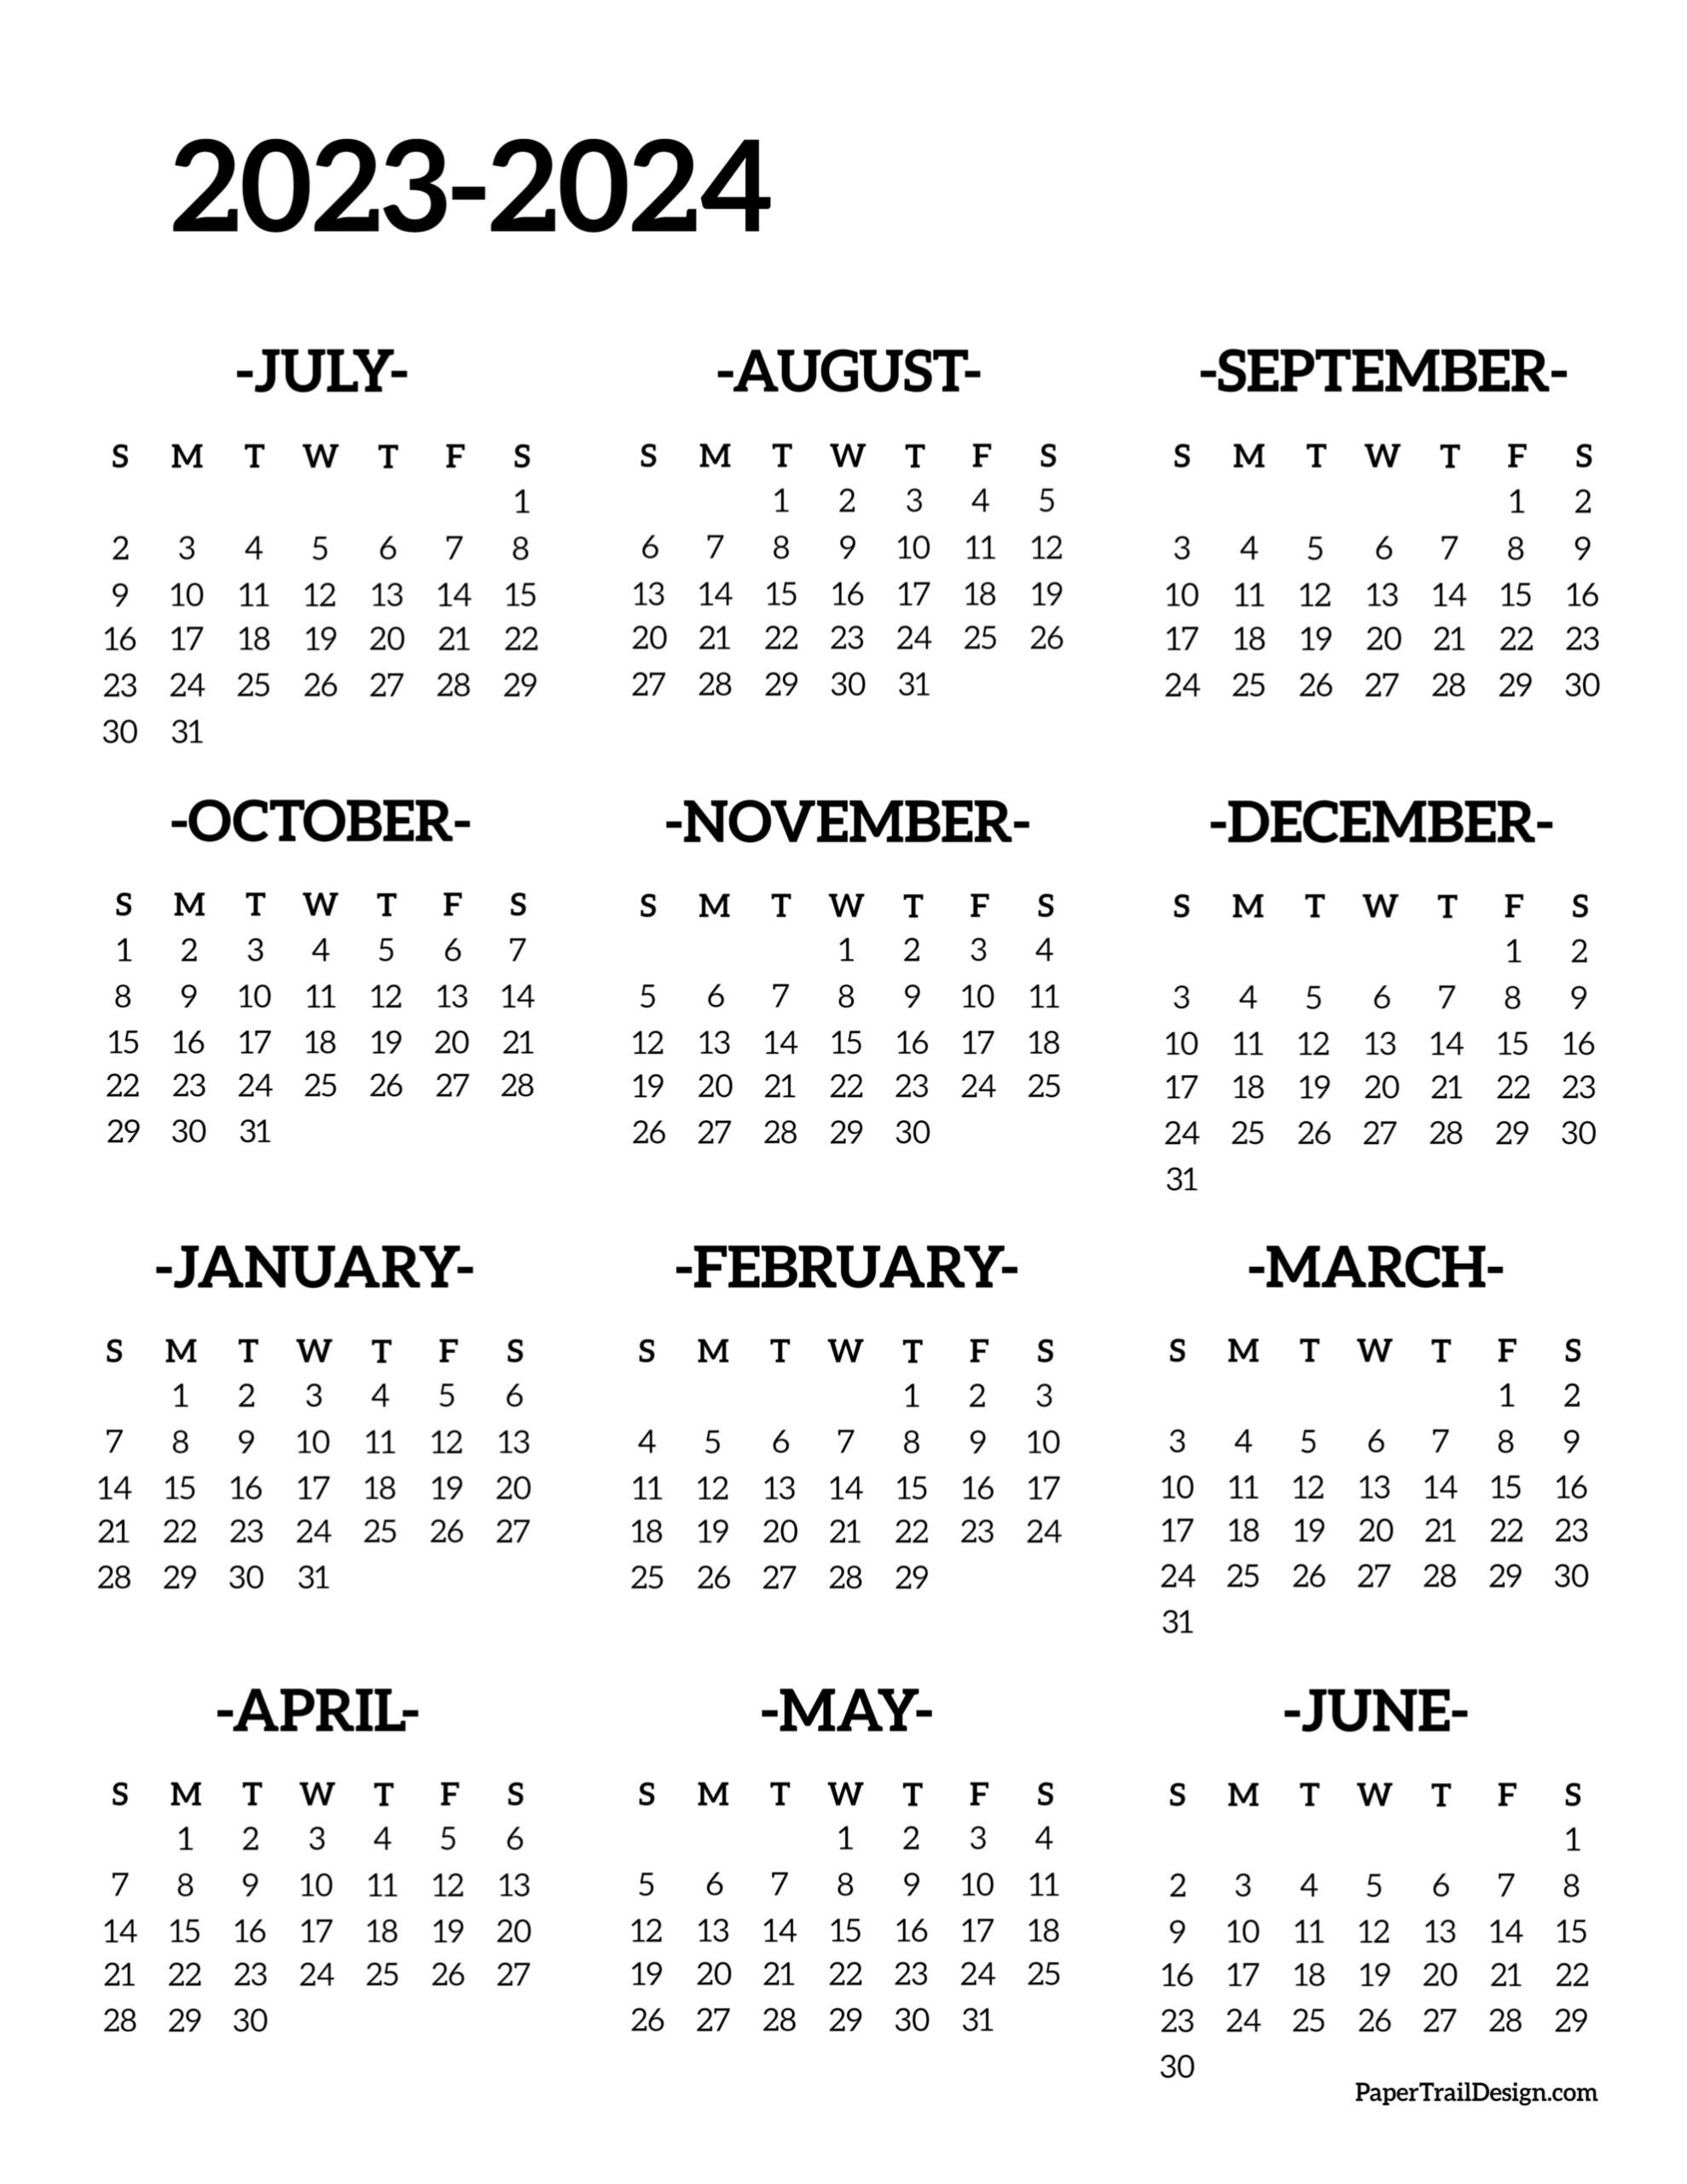 2023-2024 School Year Calendar Free Printable - Paper Trail Design for Printable Yearly Calendar 2023 And 2024